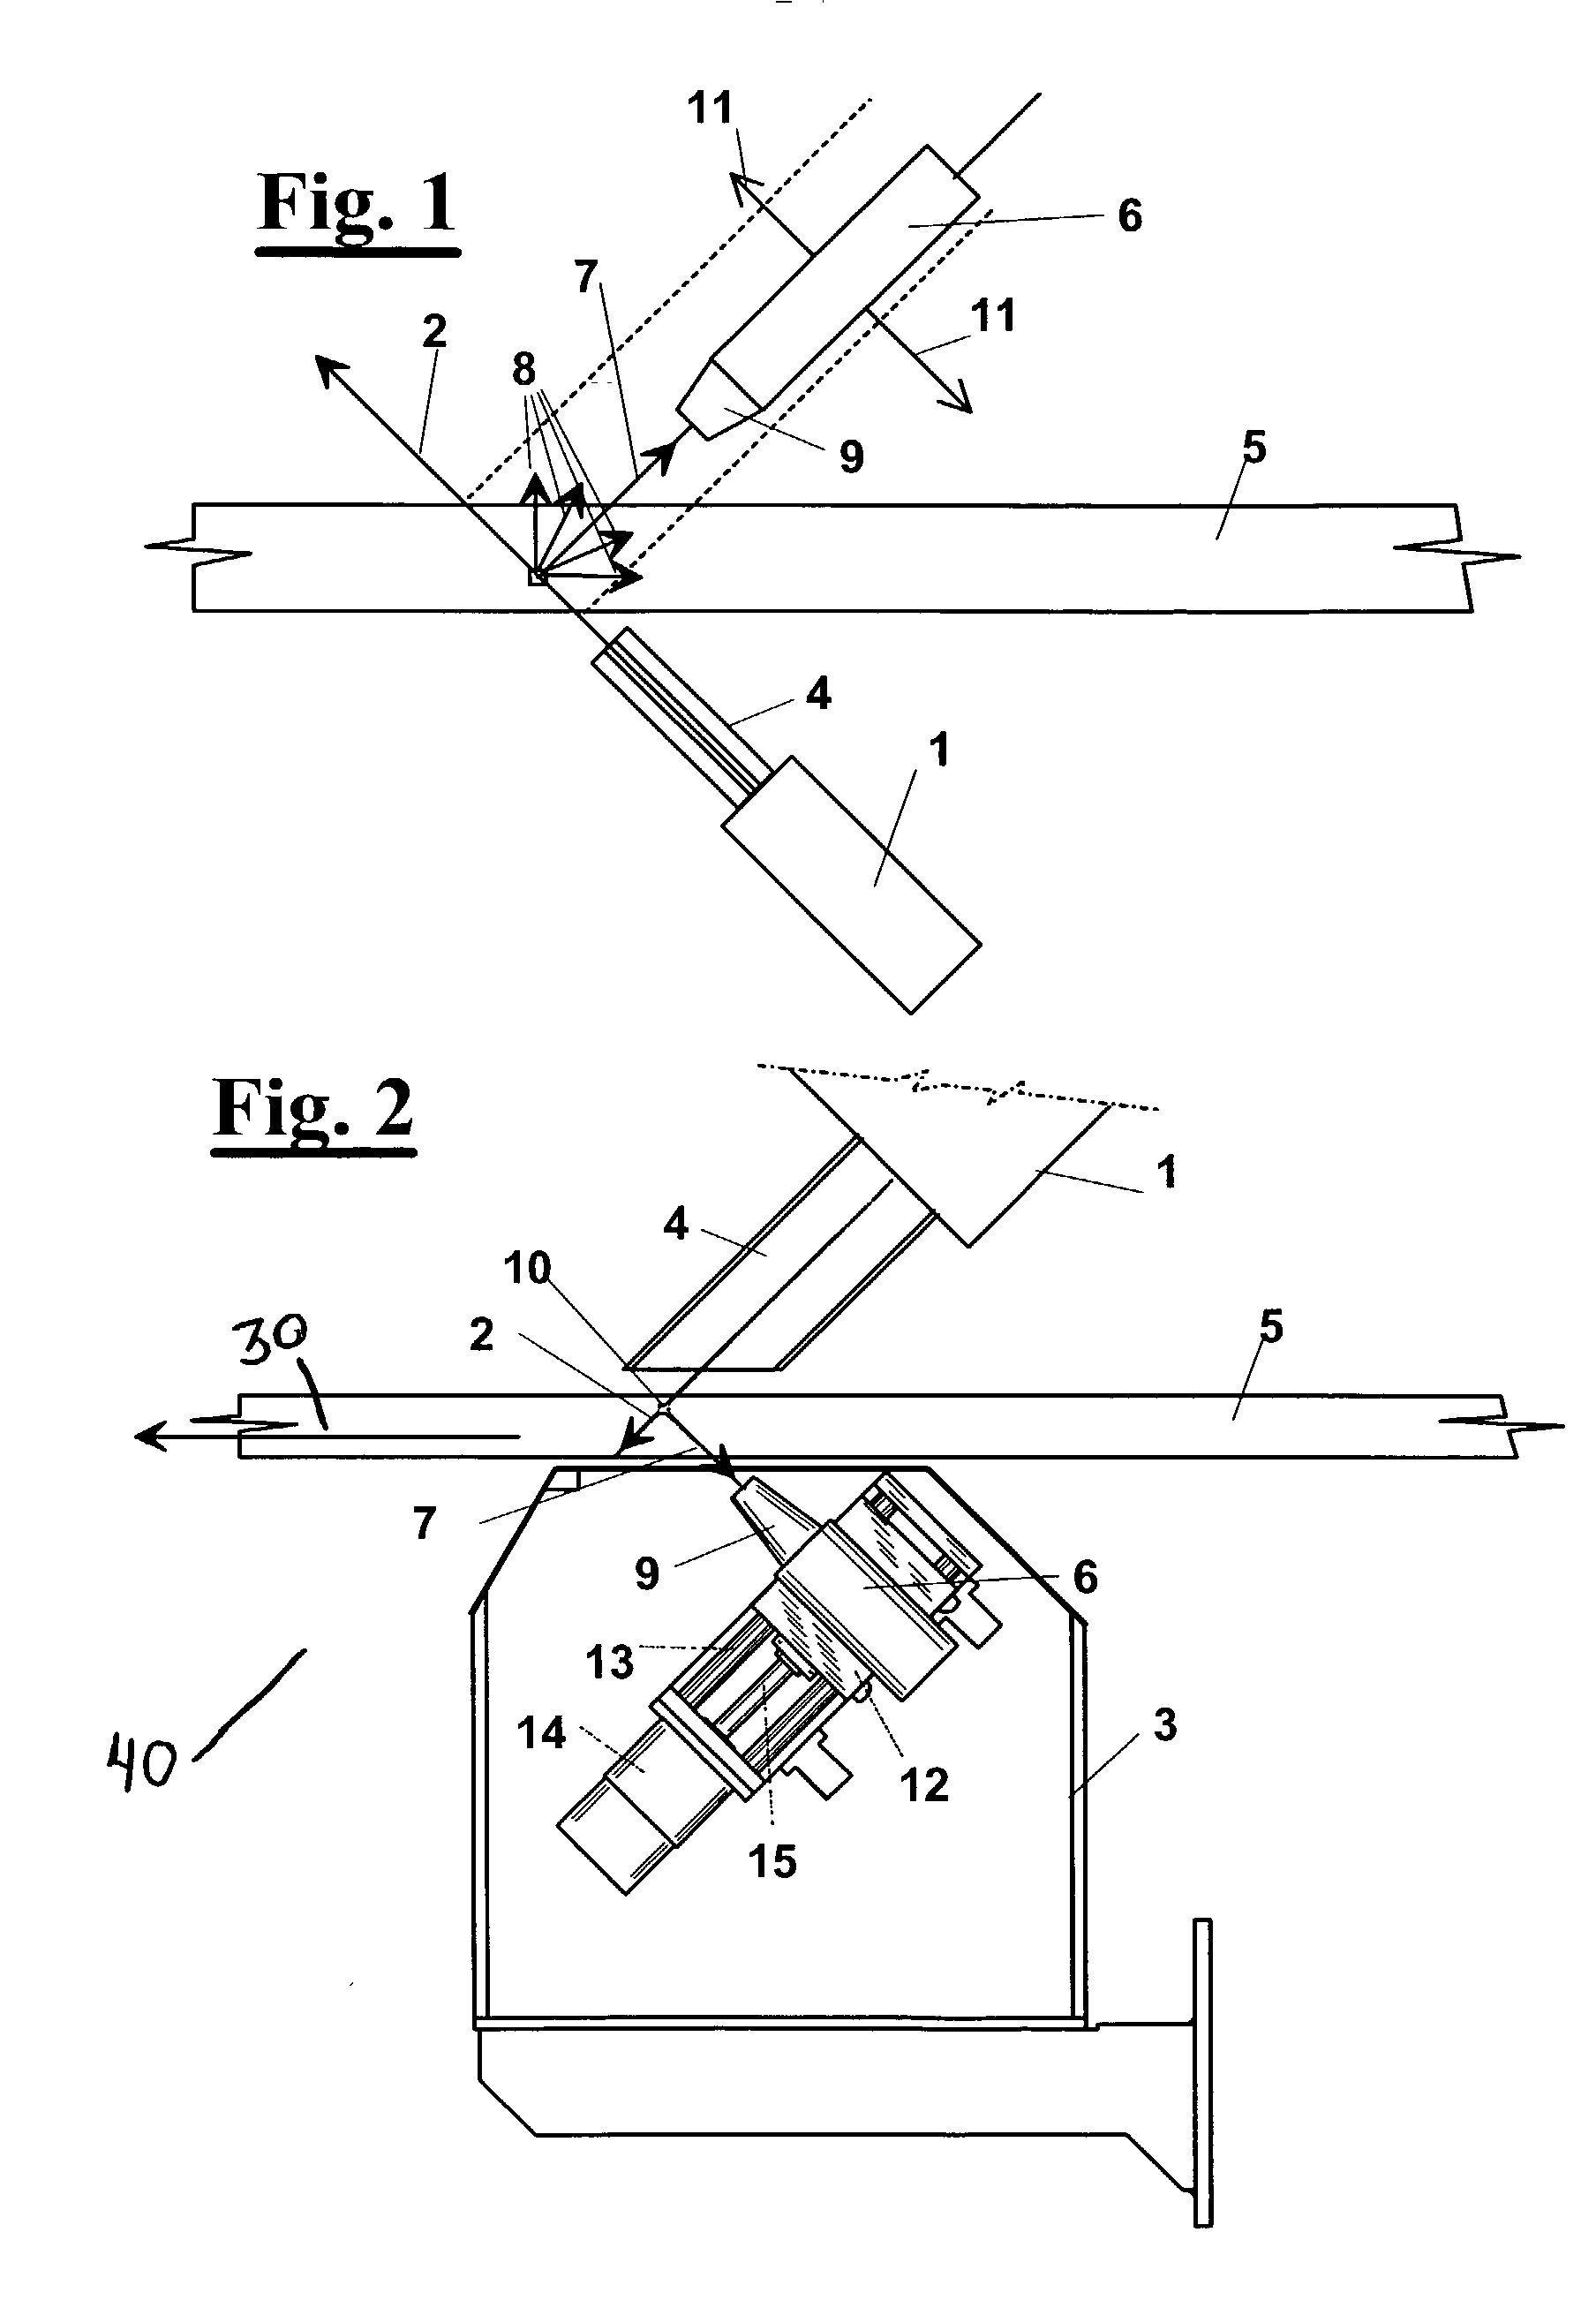 Non-destructive process for continuously measuring the density profile of panels